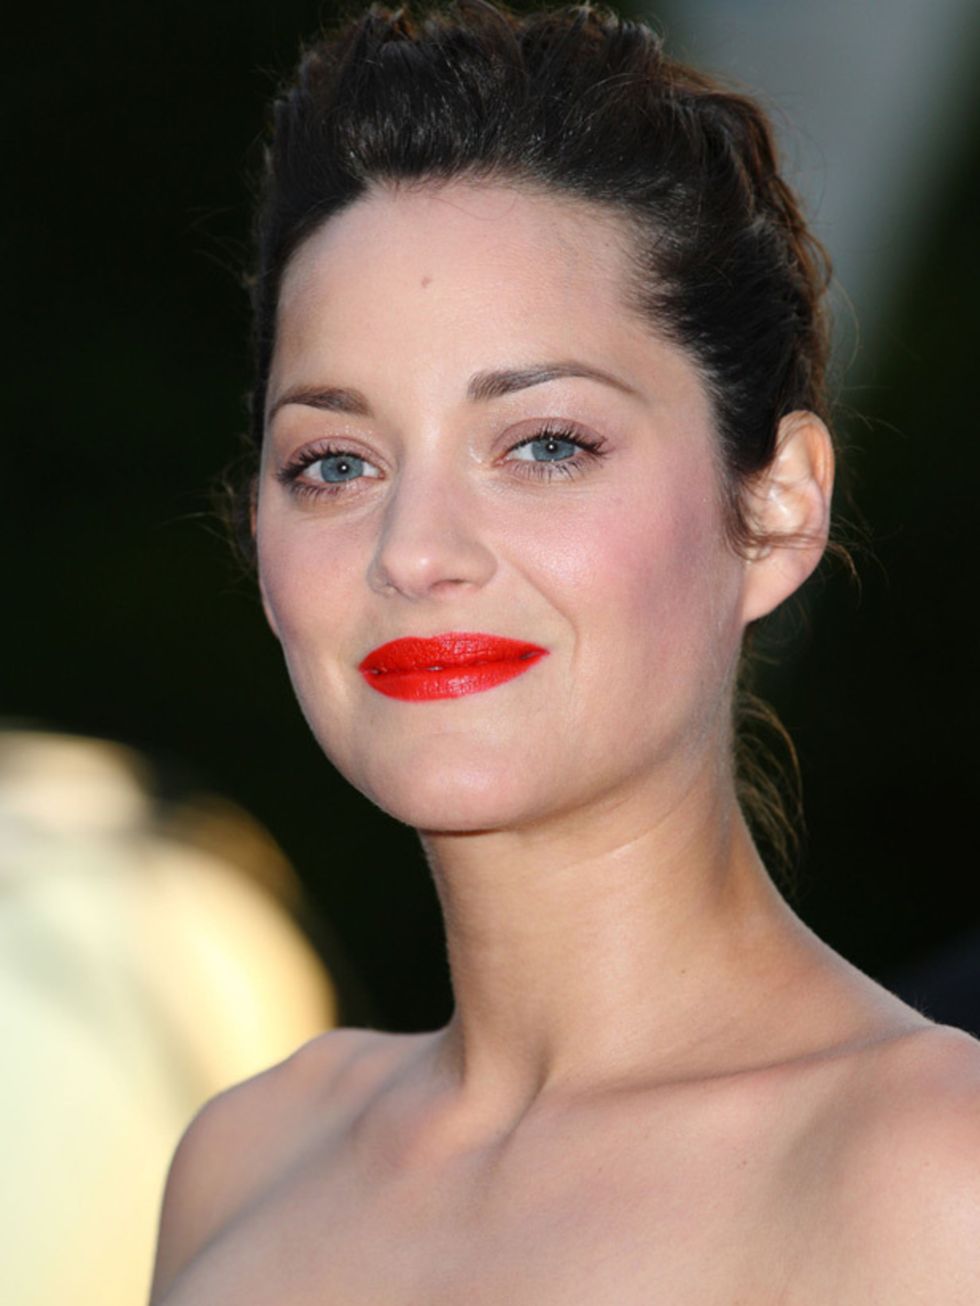 <p><a href="http://blogs.elleuk.com/beauty-notes-daily/2009/07/02/how-to-get-marion-cotillard%E2%80%99s-face-lift-hair/">See another of Marion's enviable quiffed hairstyles...</a></p>